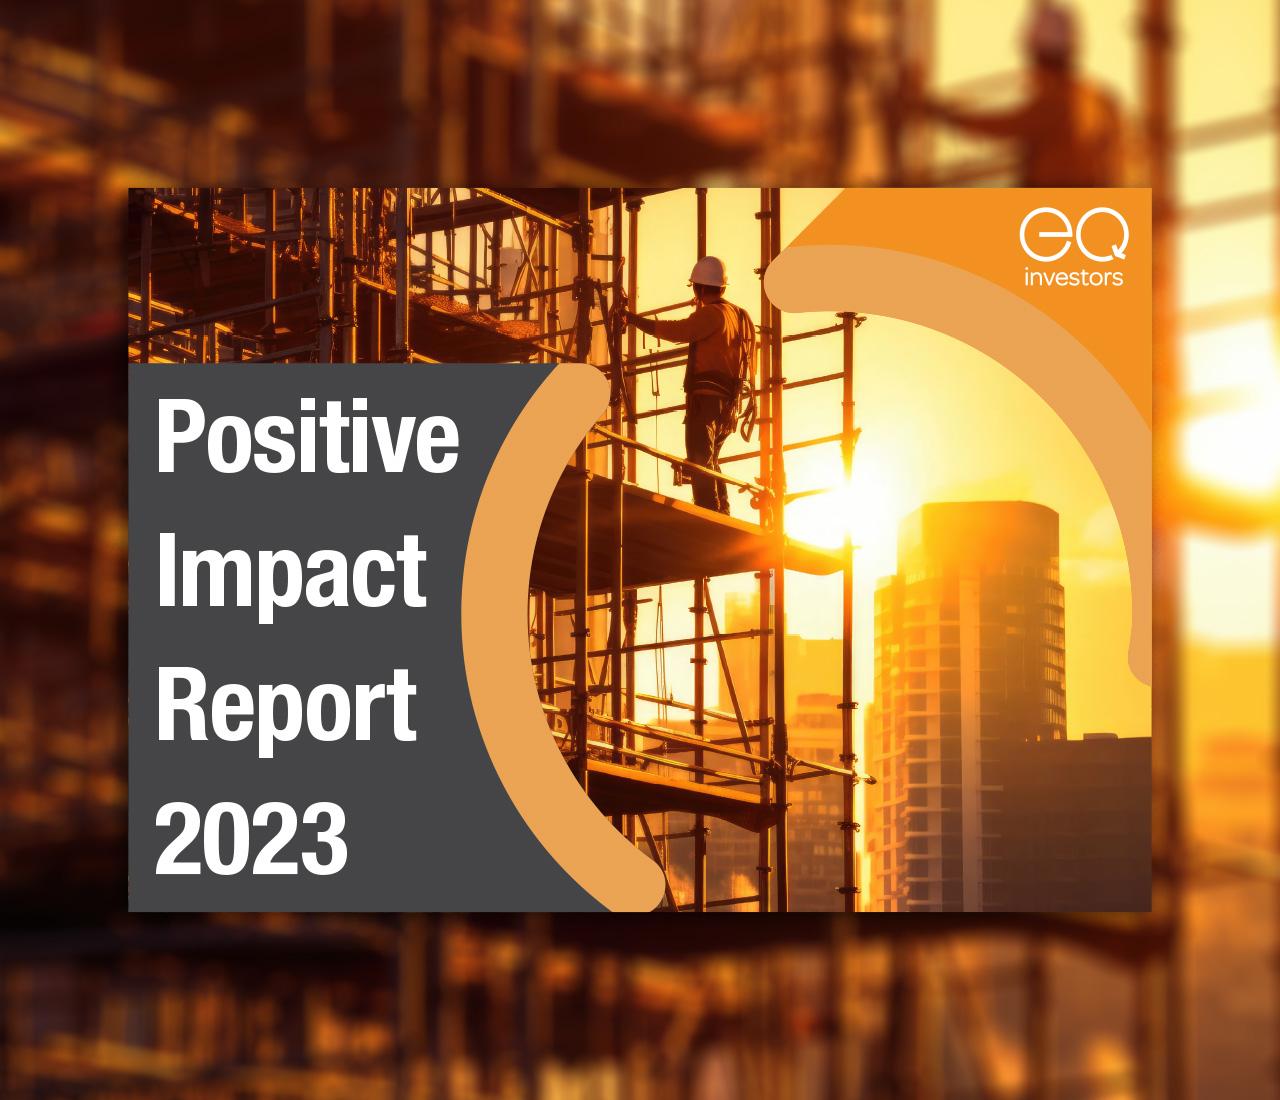 Launching our EQ Positive Impact report for 2023